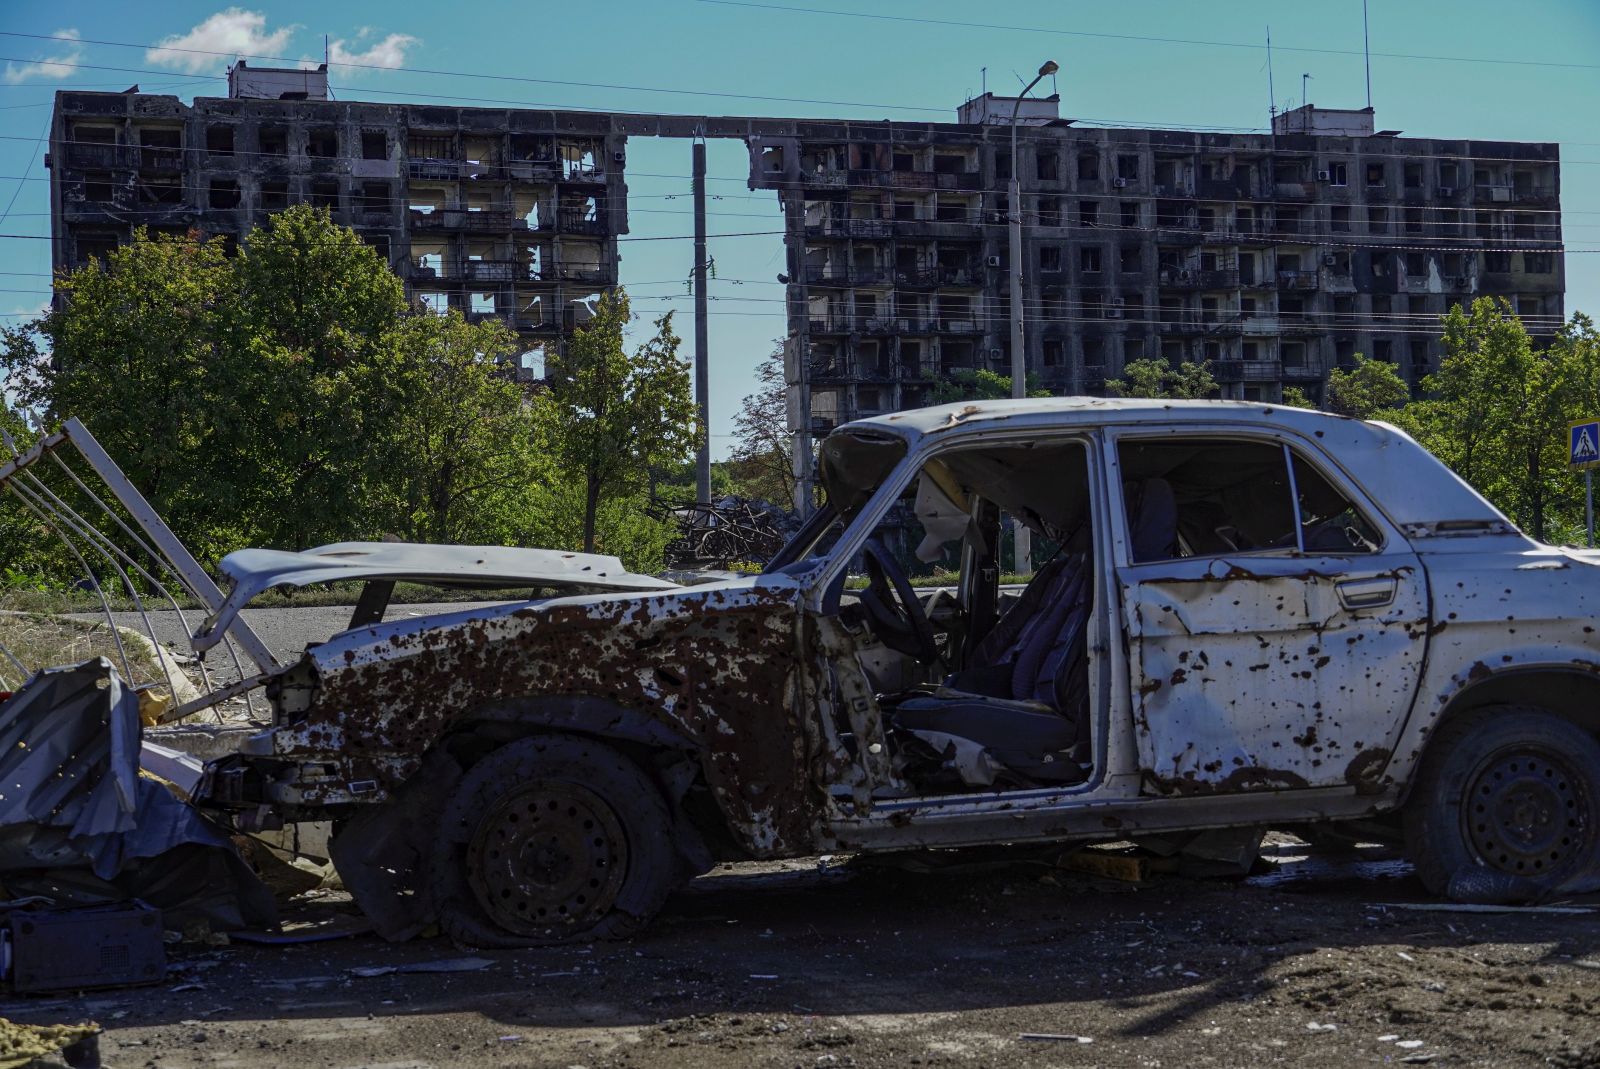 epa10206242 A damaged car in front of a destroyed building in Mariupol, eastern Ukraine, 25 September 2022. From 23 to 27 September, residents of the self-proclaimed Luhansk and Donetsk People's Republics as well as the Russian-controlled areas of the Kherson and Zaporizhzhia regions of Ukraine vote in a referendum to join the Russian Federation. On 24 February 2022 Russian troops entered the Ukrainian territory in what the Russian president declared a 'Special Military Operation', starting an armed conflict that has provoked destruction and a humanitarian crisis.  EPA/STRINGER